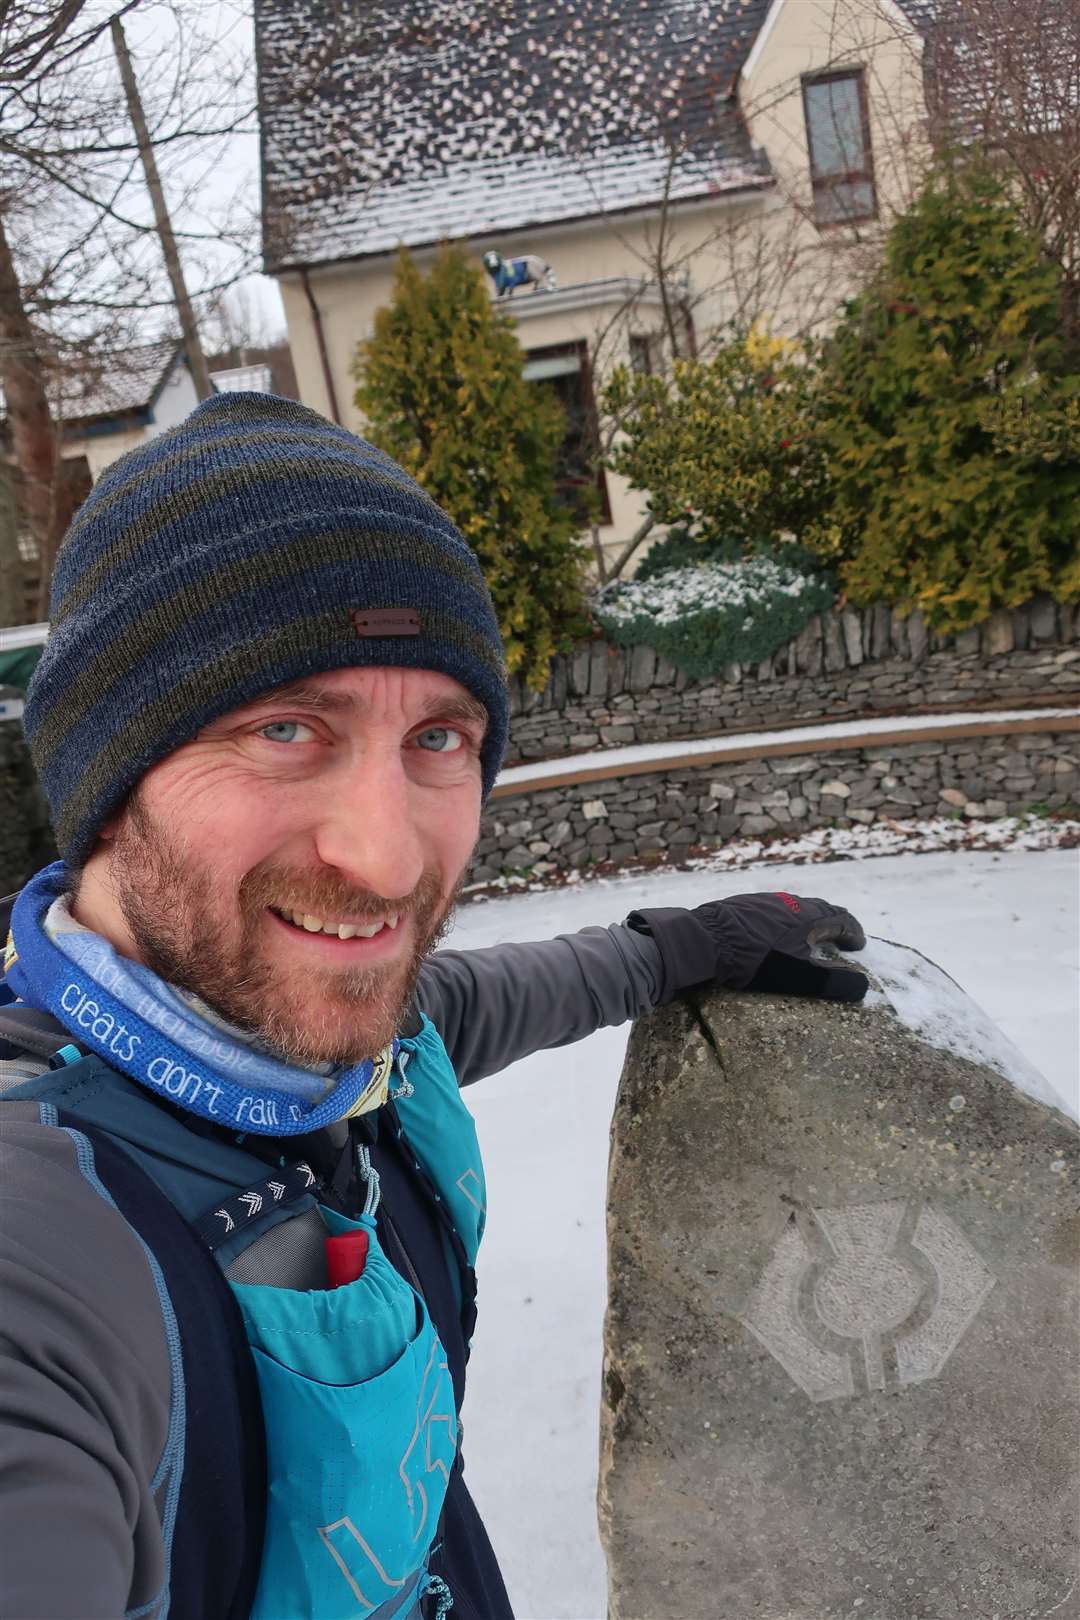 John at the end of his run – at the stone marking the terminus of the Speyside Way in Newtonmore.